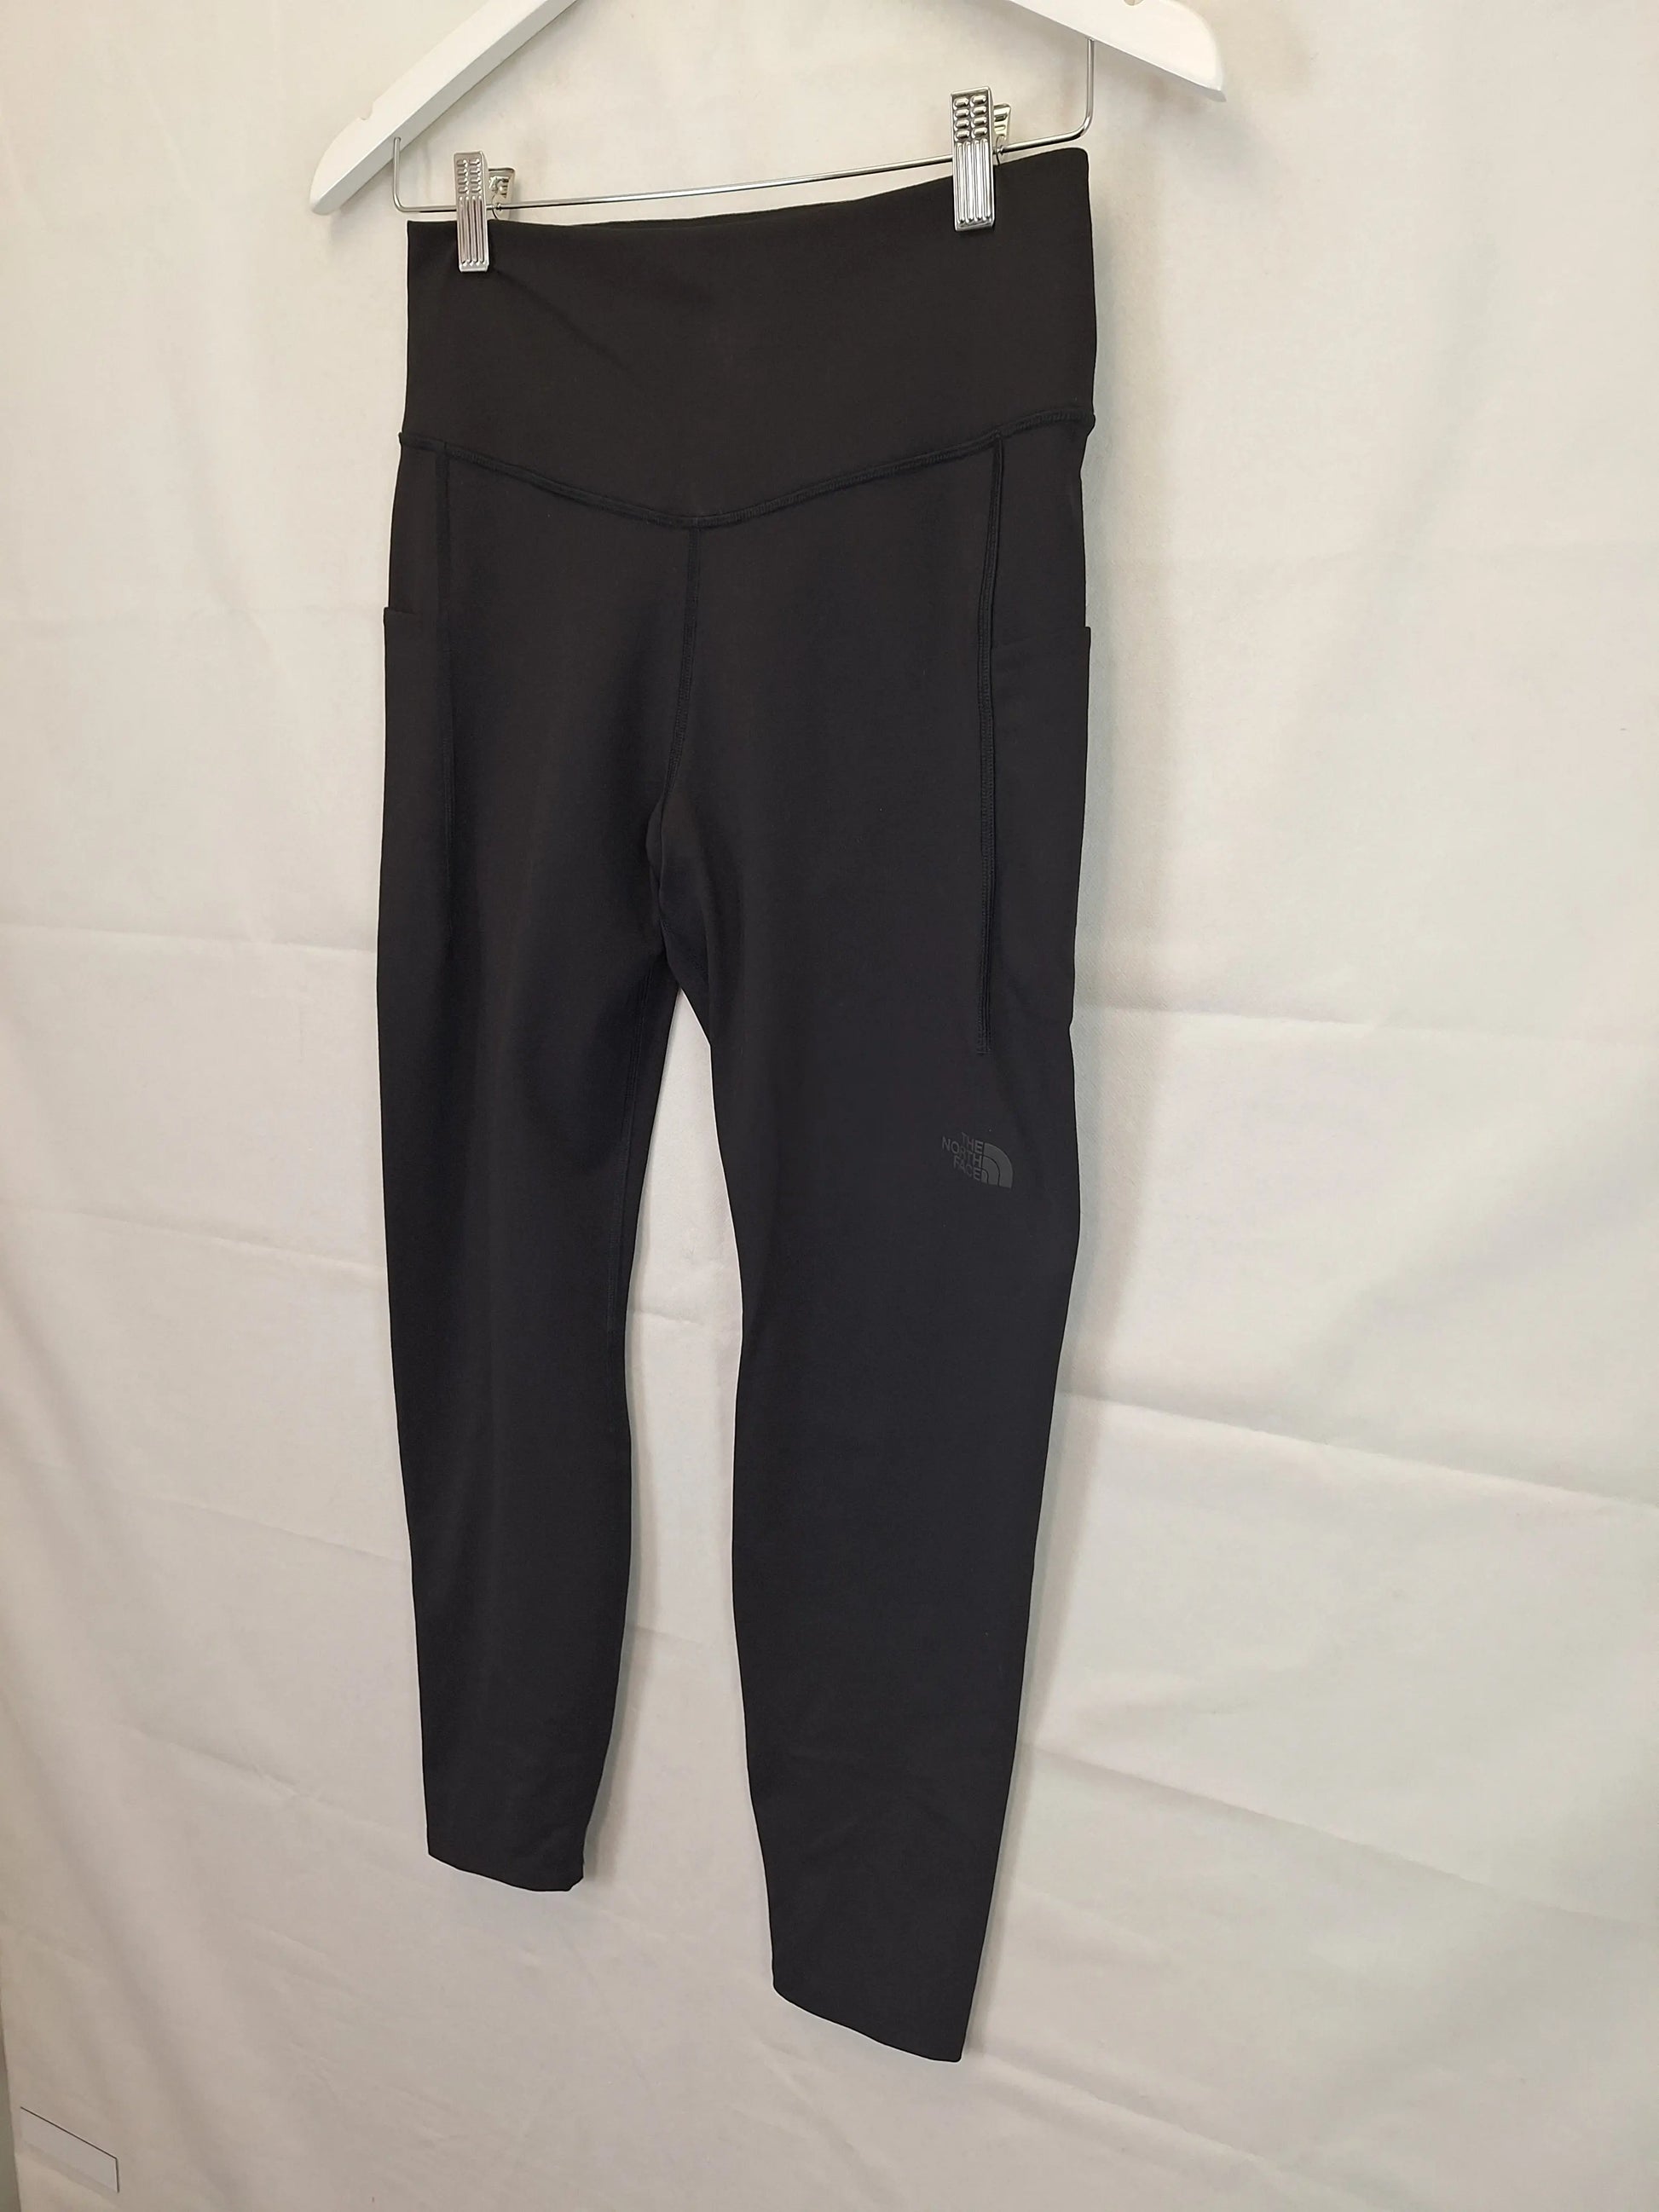 https://swapup.com.au/cdn/shop/files/The-North-Face-Midline-Active-Leggings-Size-XL-by-SwapUp-Online-Second-Hand-Store-Thrift-Store-Op-Shop-19646611.jpg?v=1698969680&width=1946